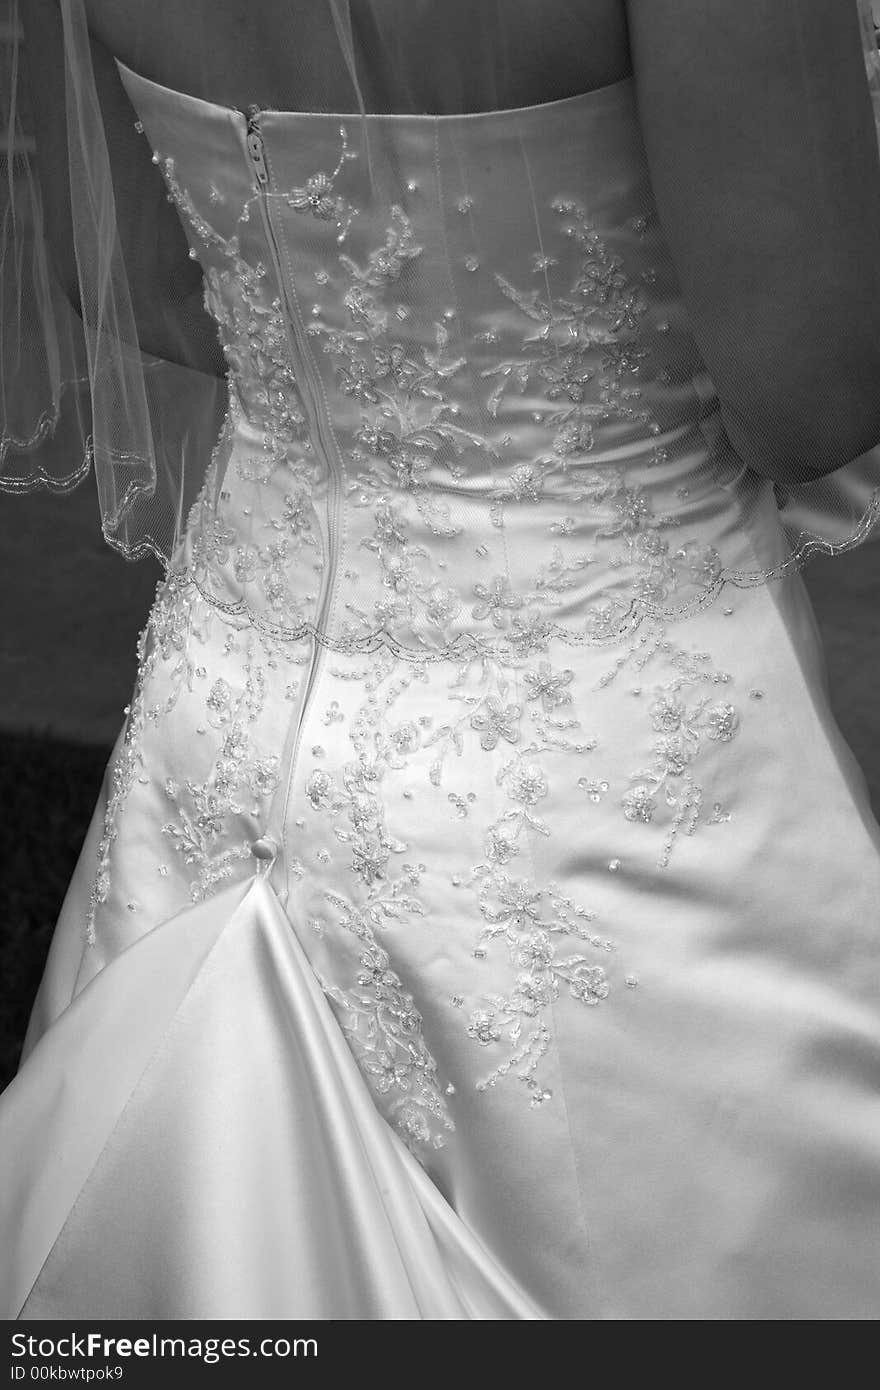 A bride showing off the backside of her dress